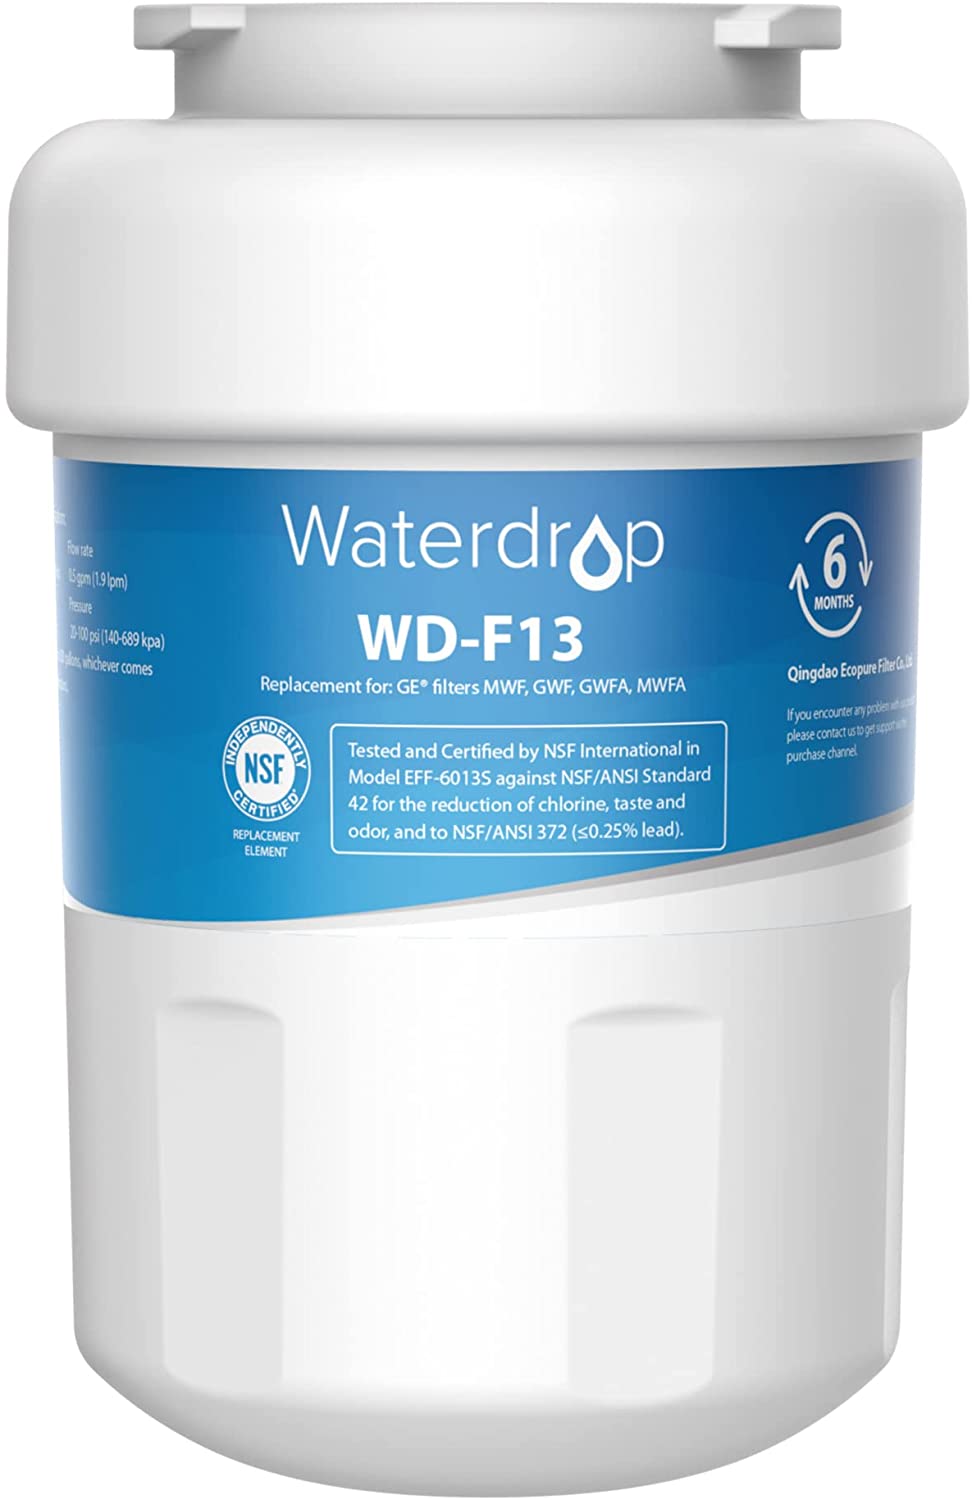 Waterdrop MWF Refrigerator Water Filter, Replacement for GE® SmartWater MWF, MWFINT, MWFP, MWFA, GWF, HDX FMG-1, GSE25GSHECSS, WFC1201, RWF1060, 197D6321P006, Kenmore 9991, r-9991(package may vary) - image 1 of 7